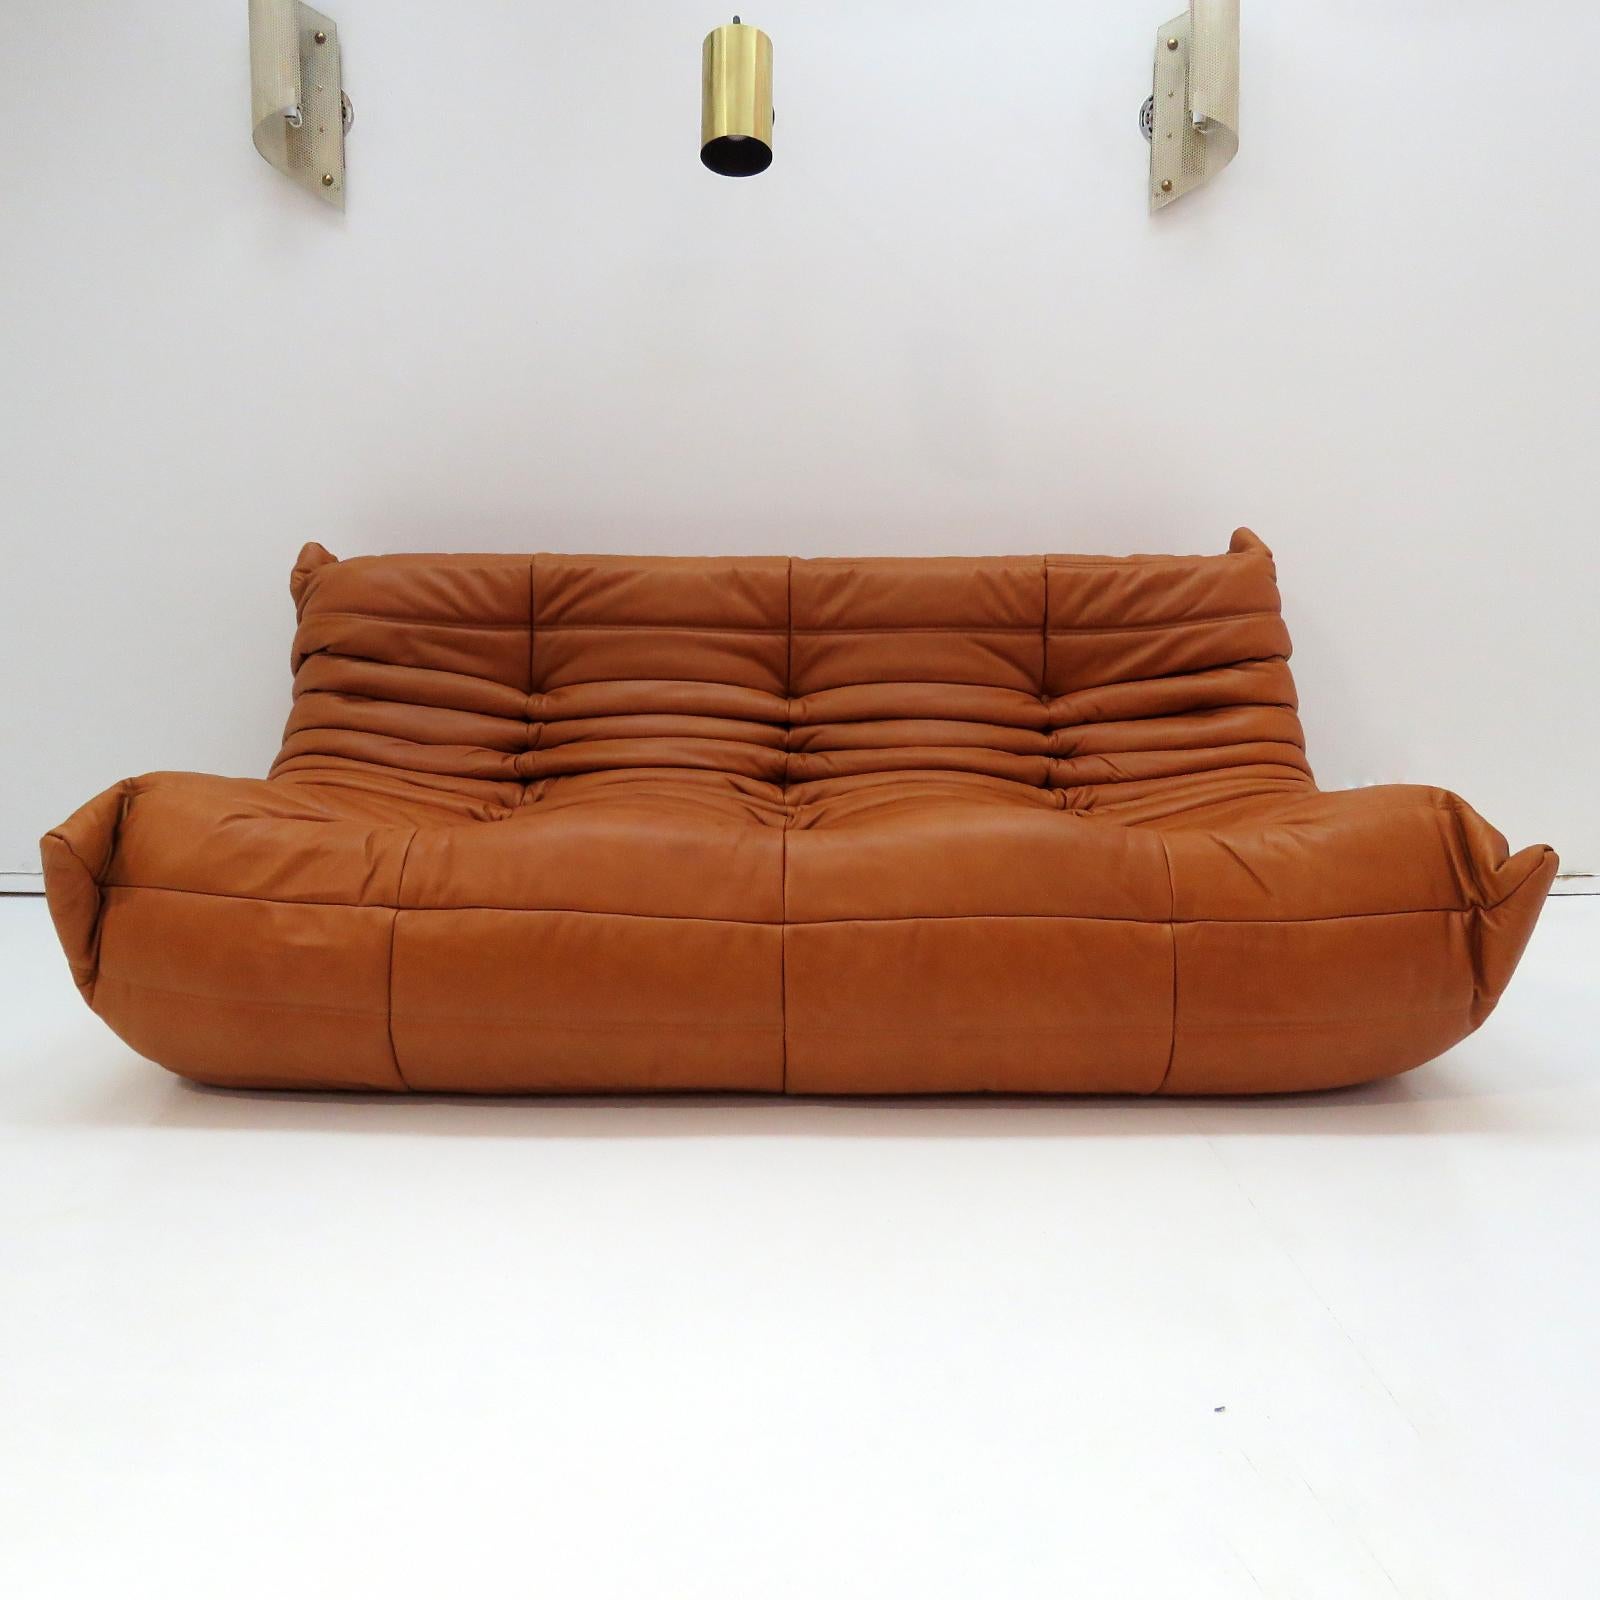 Late 20th Century Three-Seater Sofa 'Togo' by Michel Ducaroy for Ligne Roset